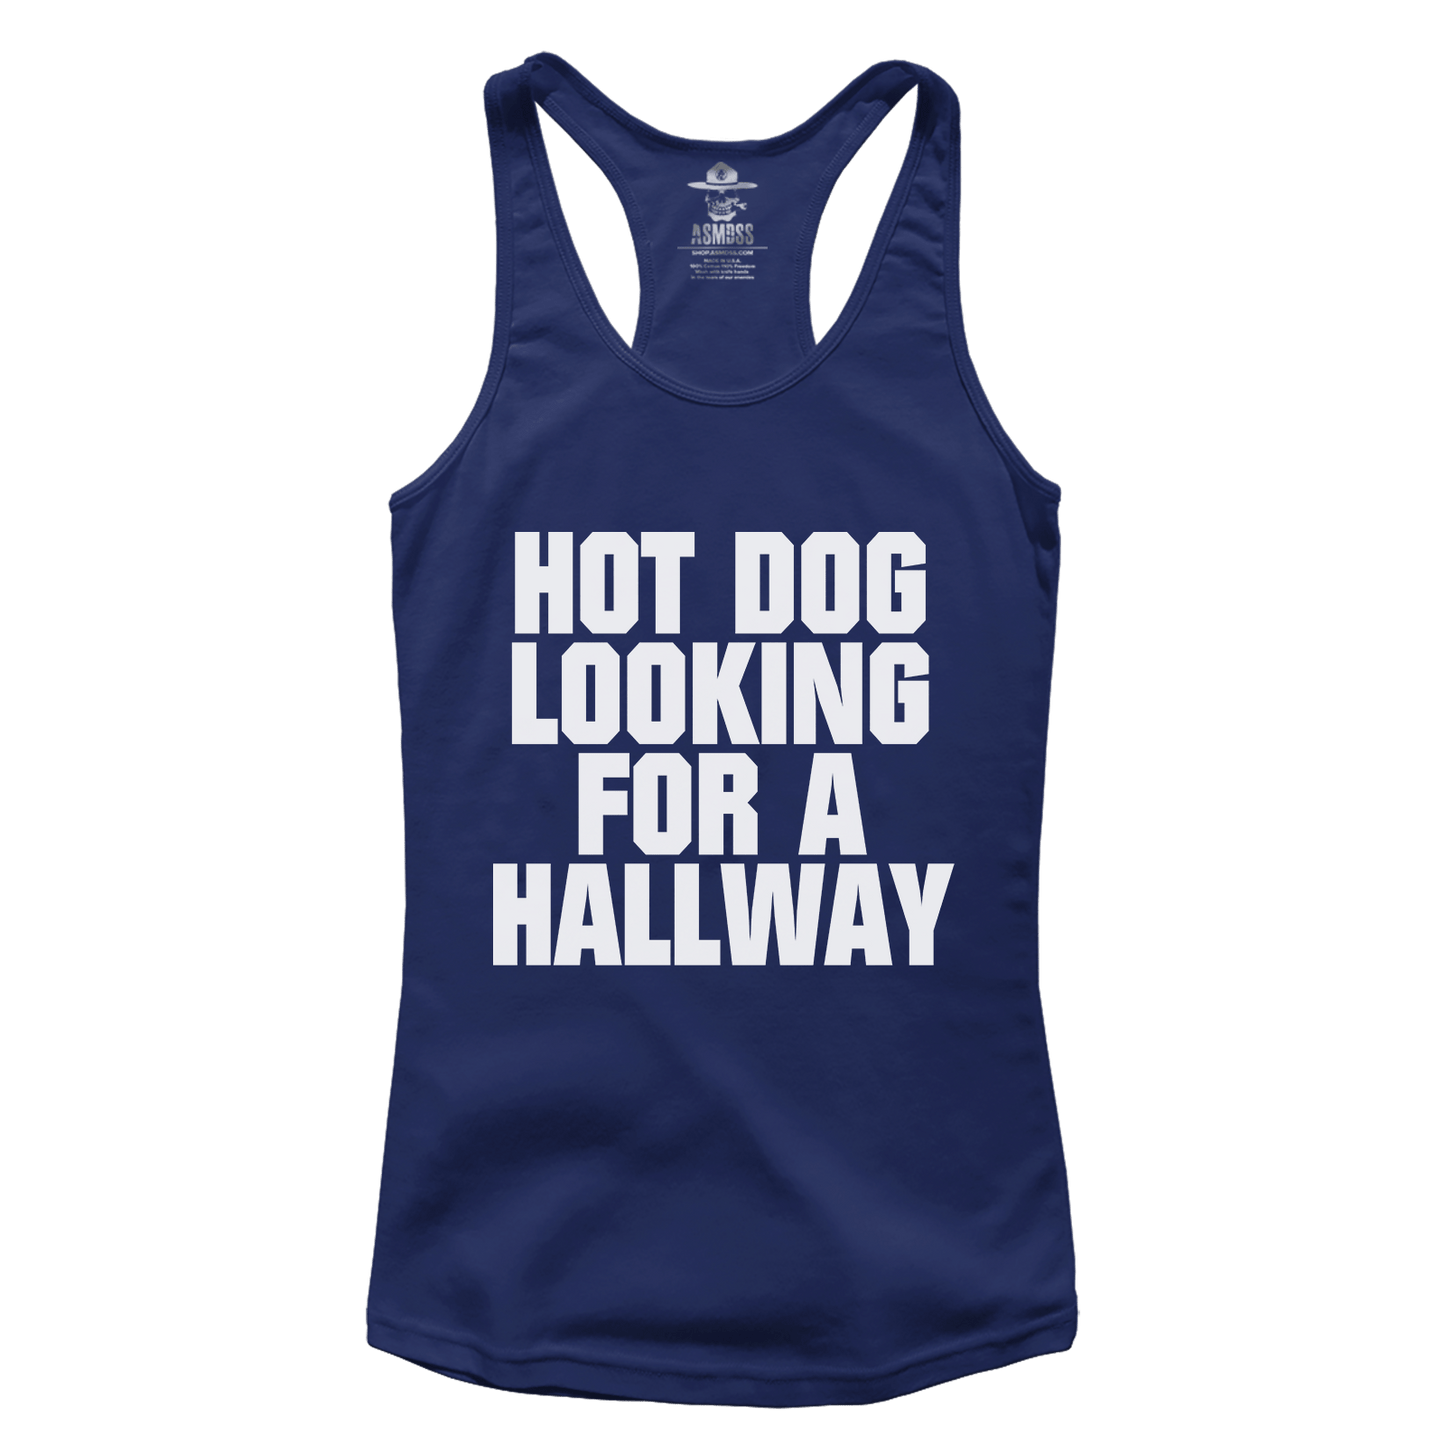 Hot Dog Looking For A Hallway (Ladies)